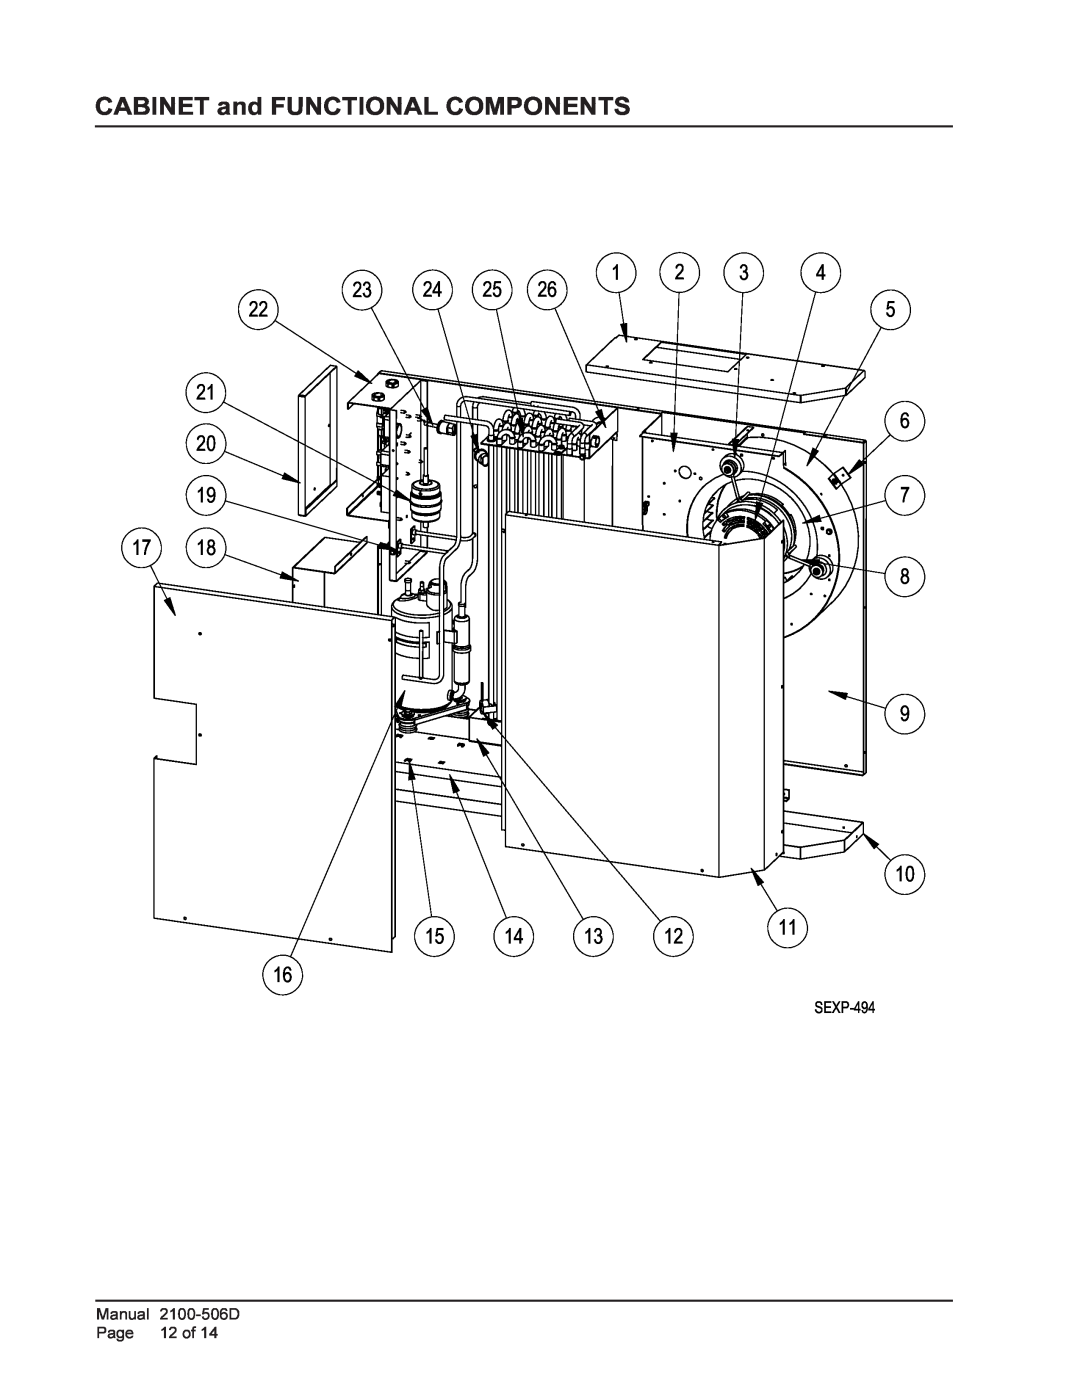 Bard CH4S1, CH5S1, CH3S1 installation instructions CABINET and FUNCTIONAL COMPONENTS 